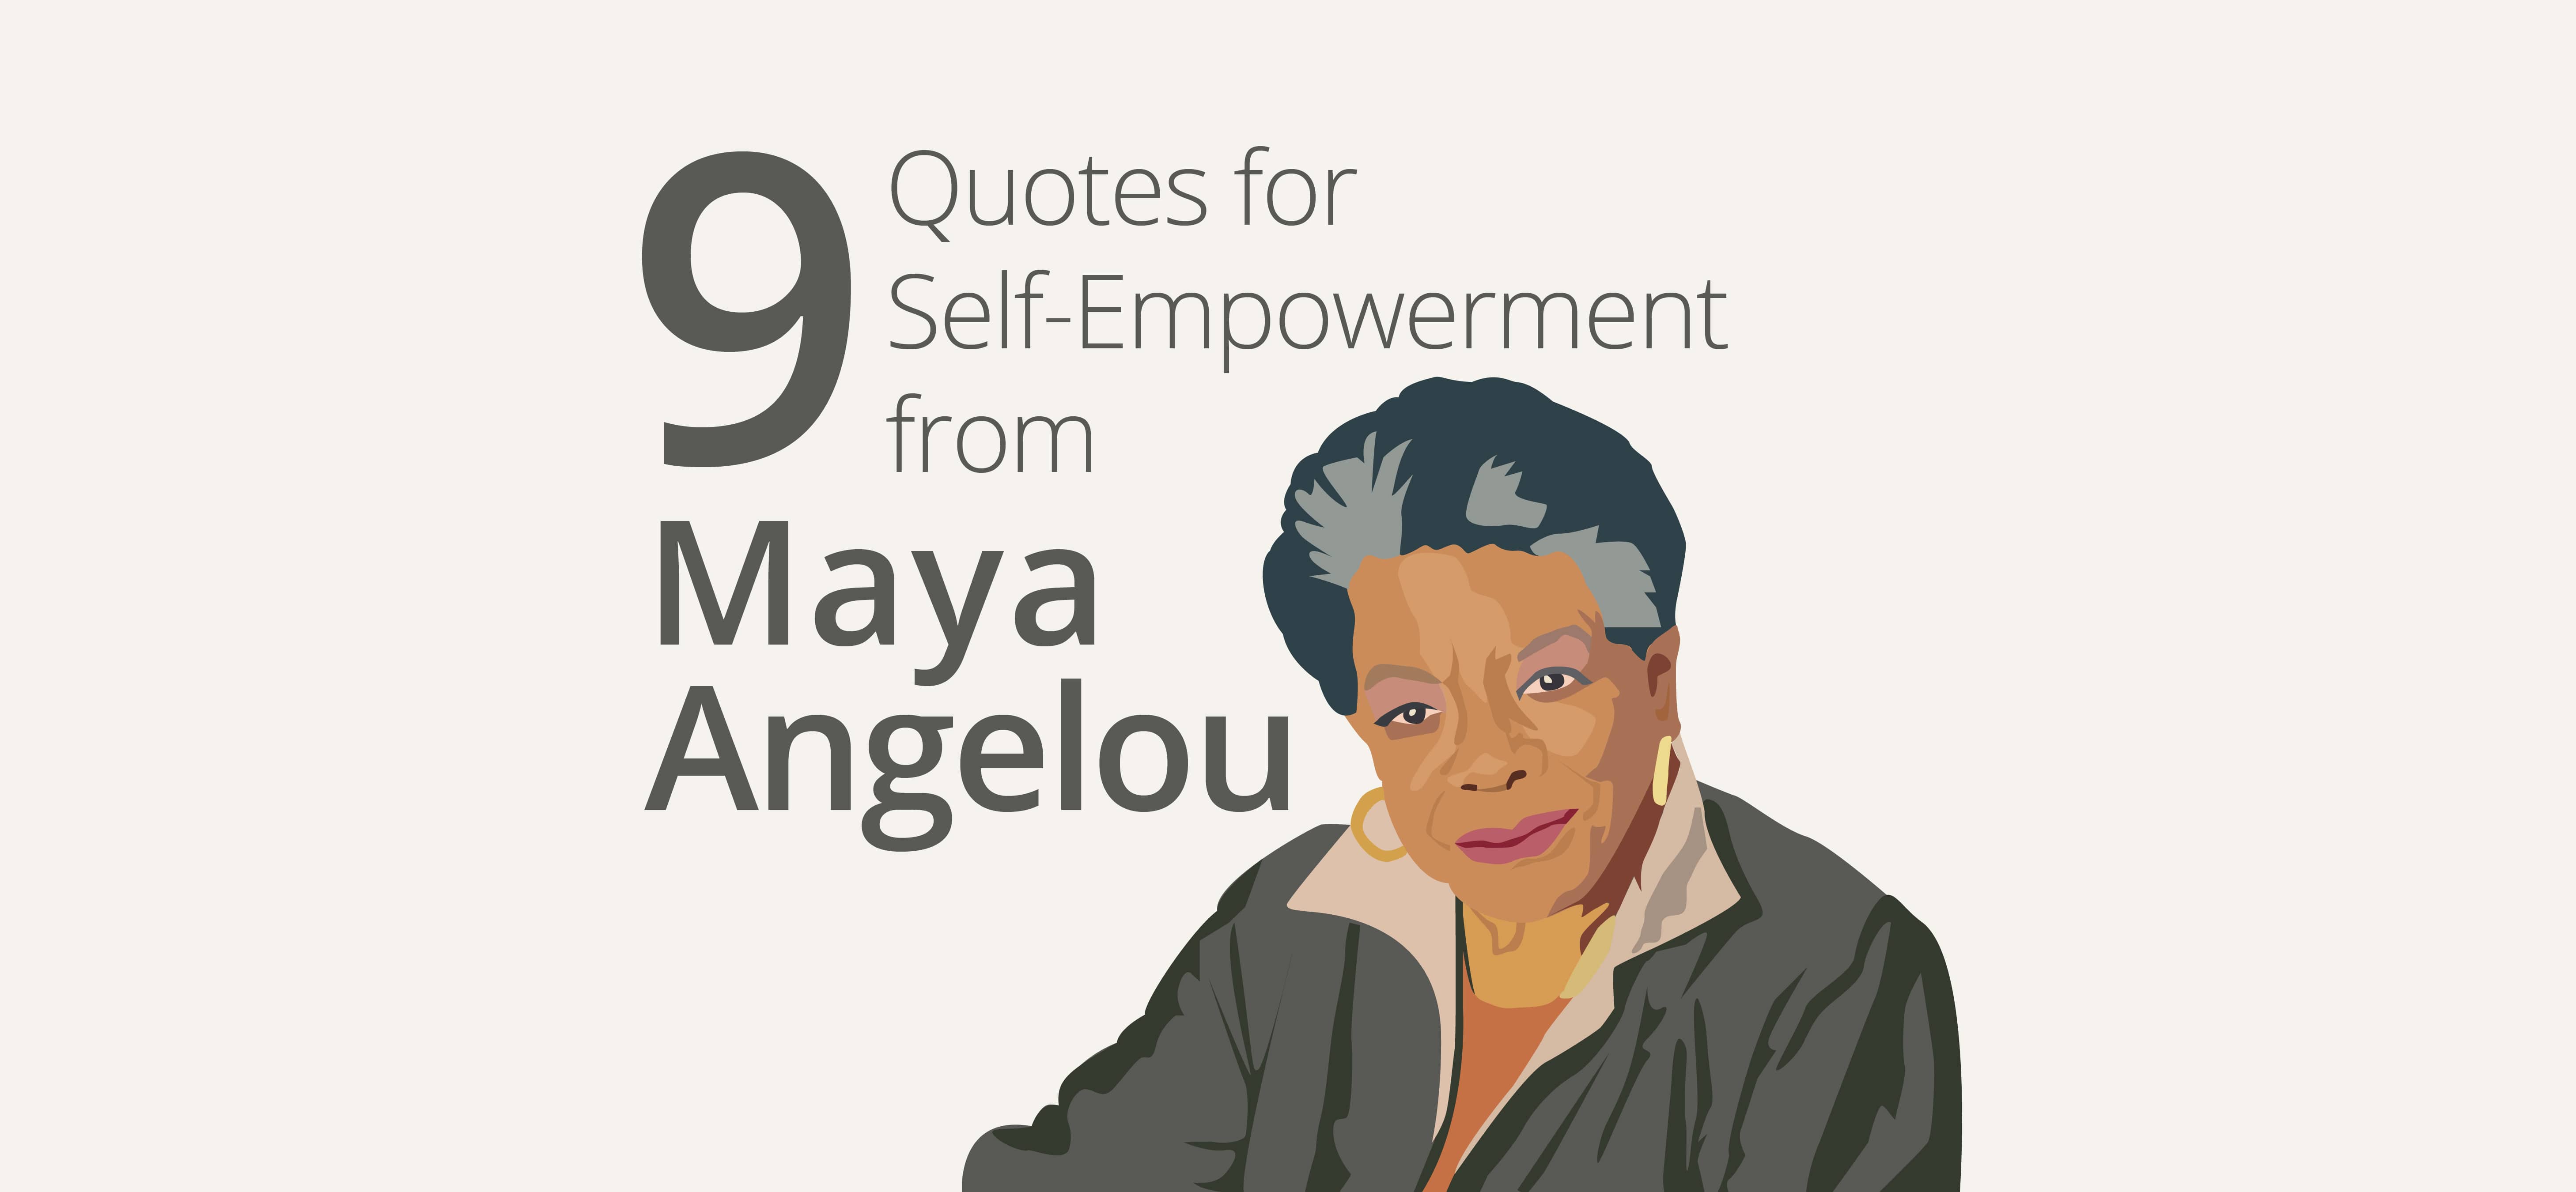 9 Quotes for Self-Empowerment from Maya Angelou